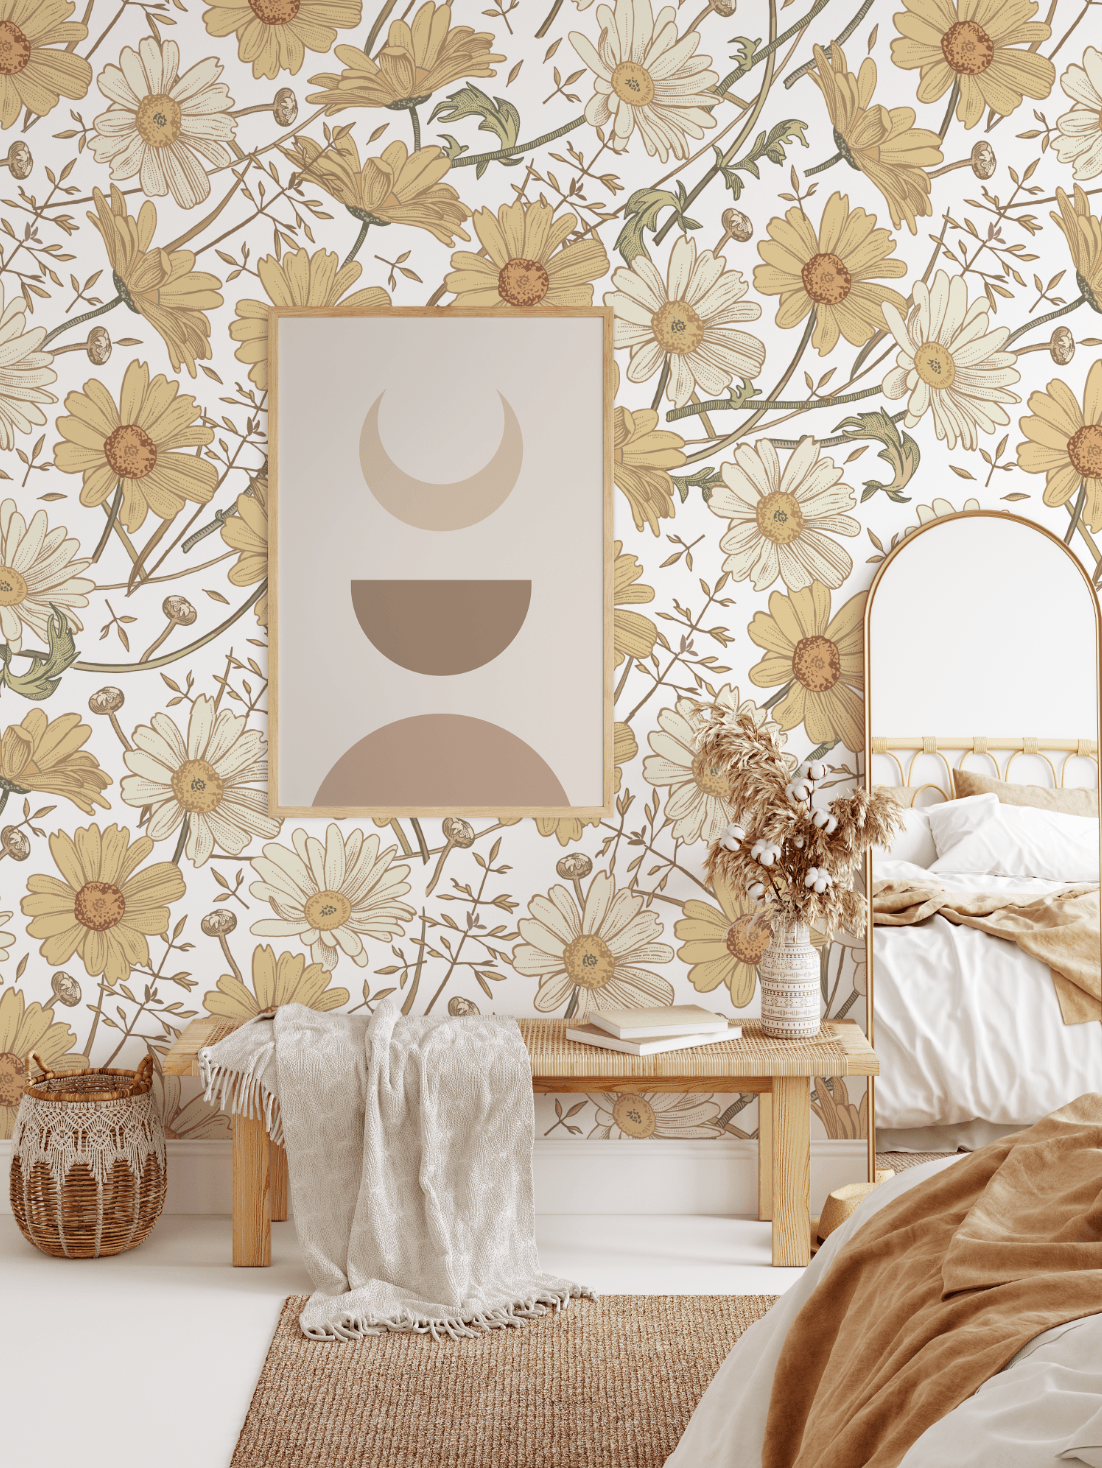 Daisy Love Peel And Stick Removable Wallpaper